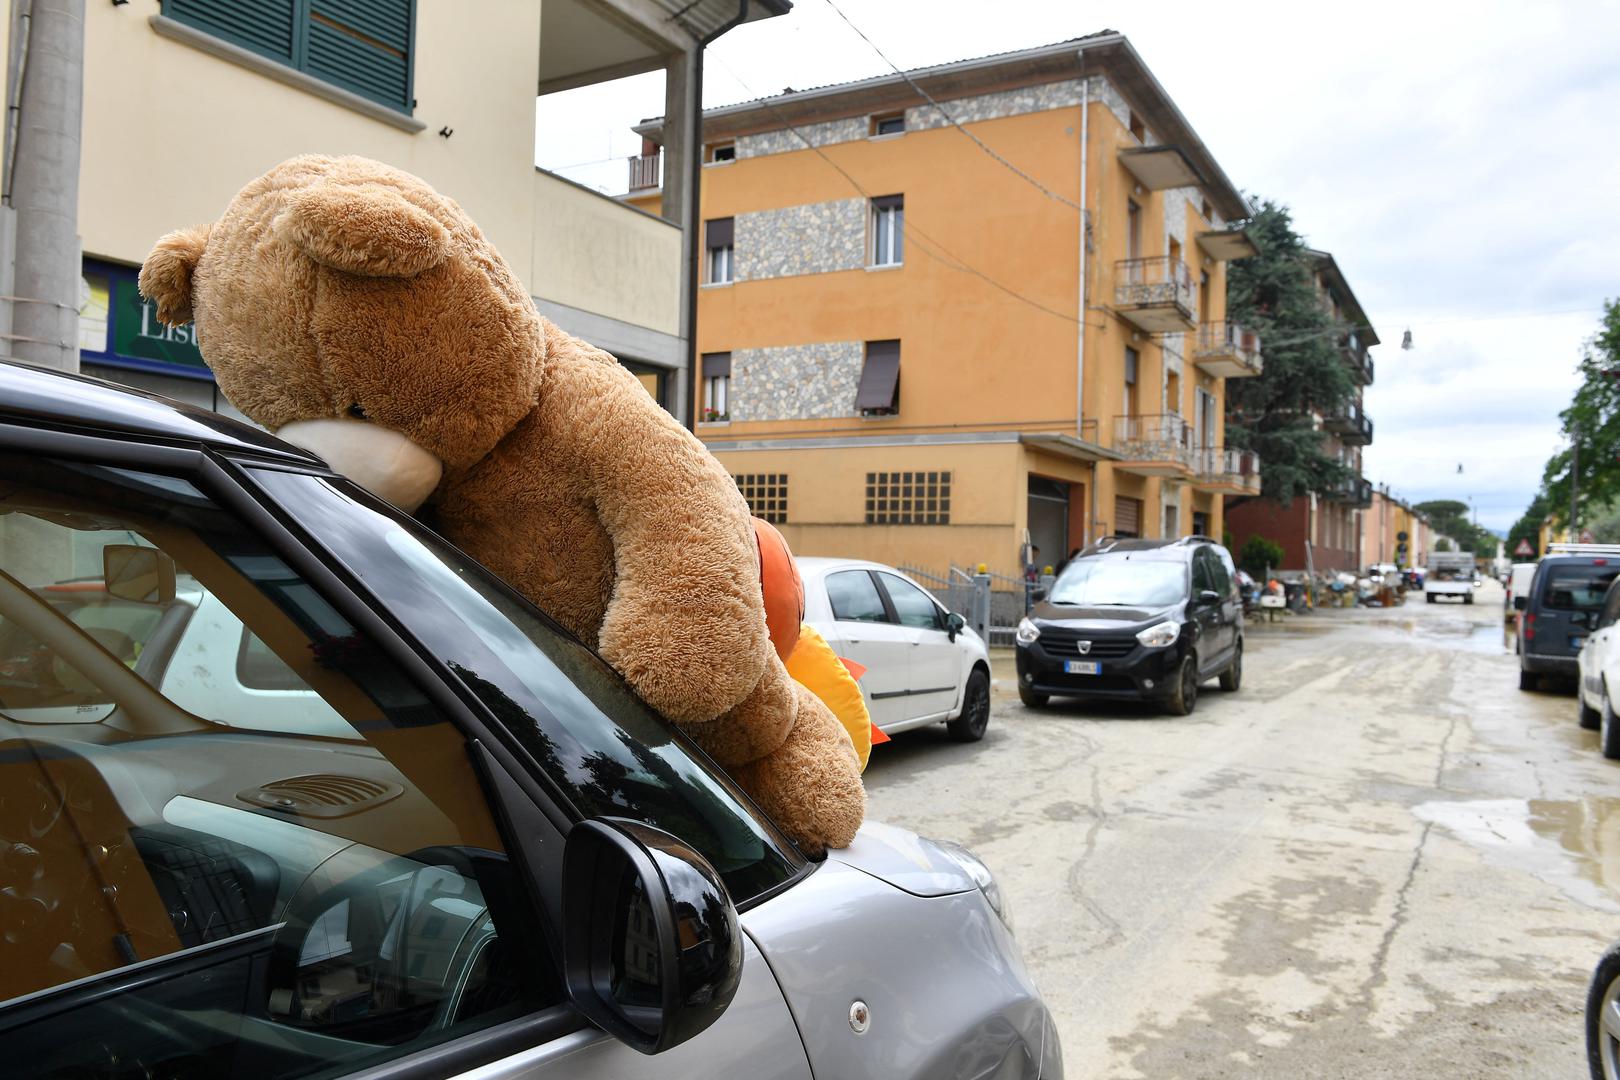 A teddy bear toy is seen on a car after heavy rains hit Italy's Emilia Romagna region, in Castel Bolognese, Italy, May 18, 2023. REUTERS/Jennifer Lorenzini Photo: JENNIFER LORENZINI/REUTERS